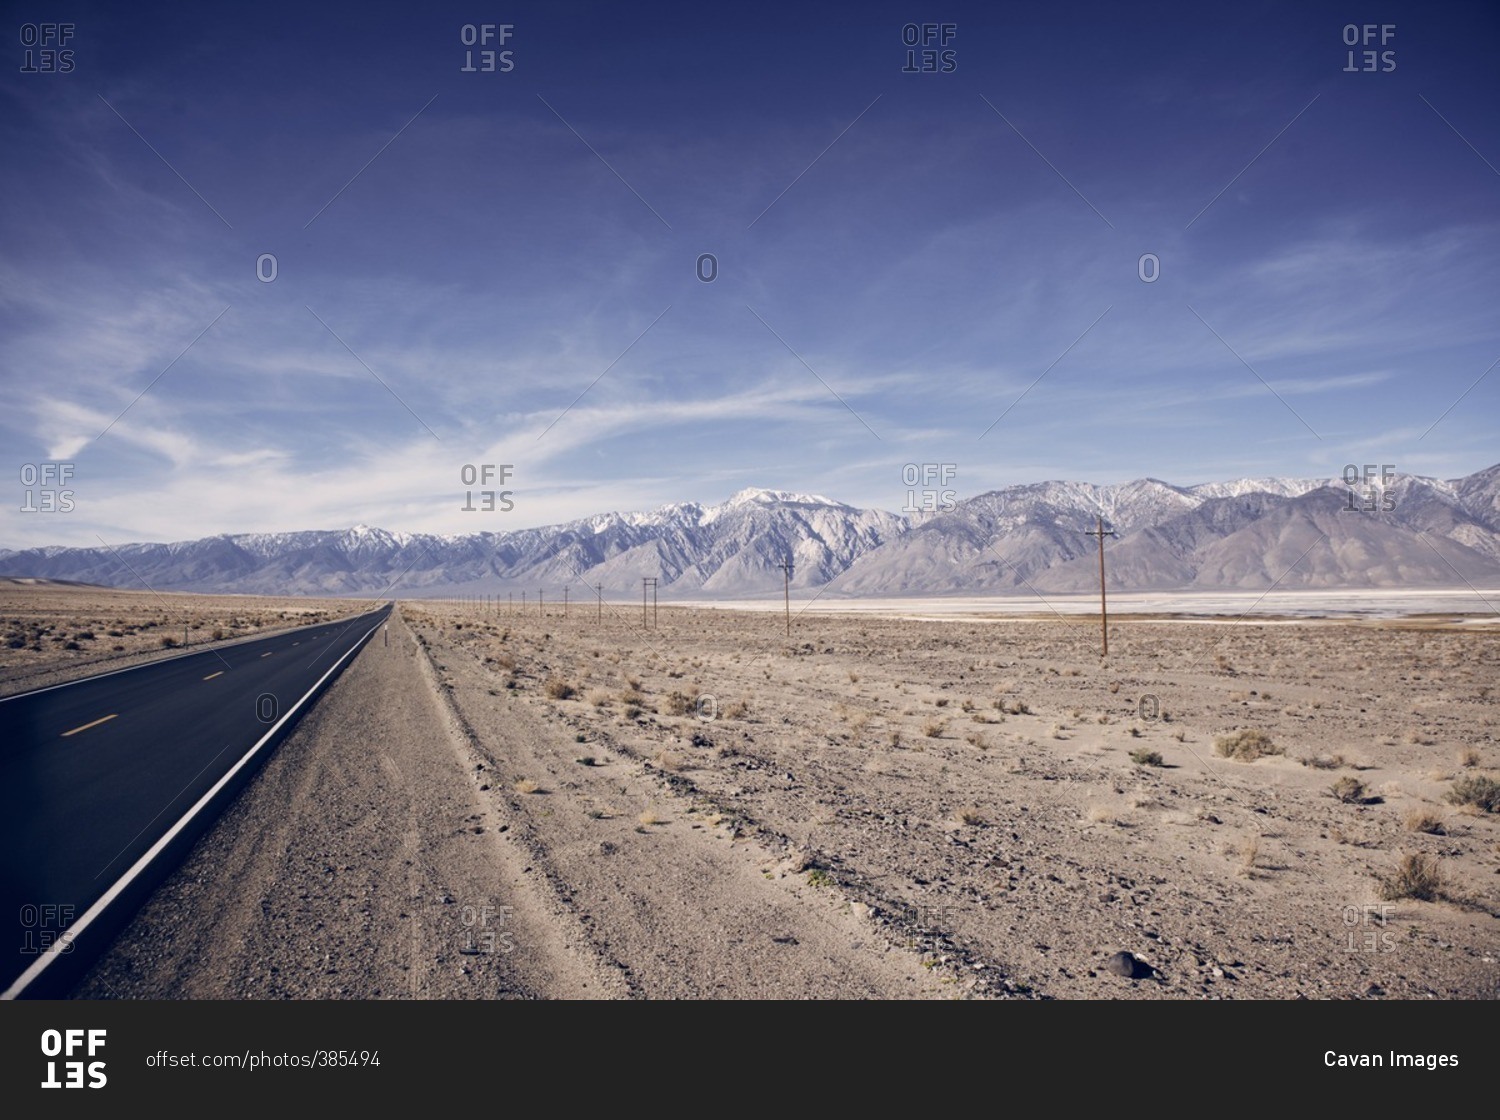 Scenic view of Death Valley National Park against blue sky